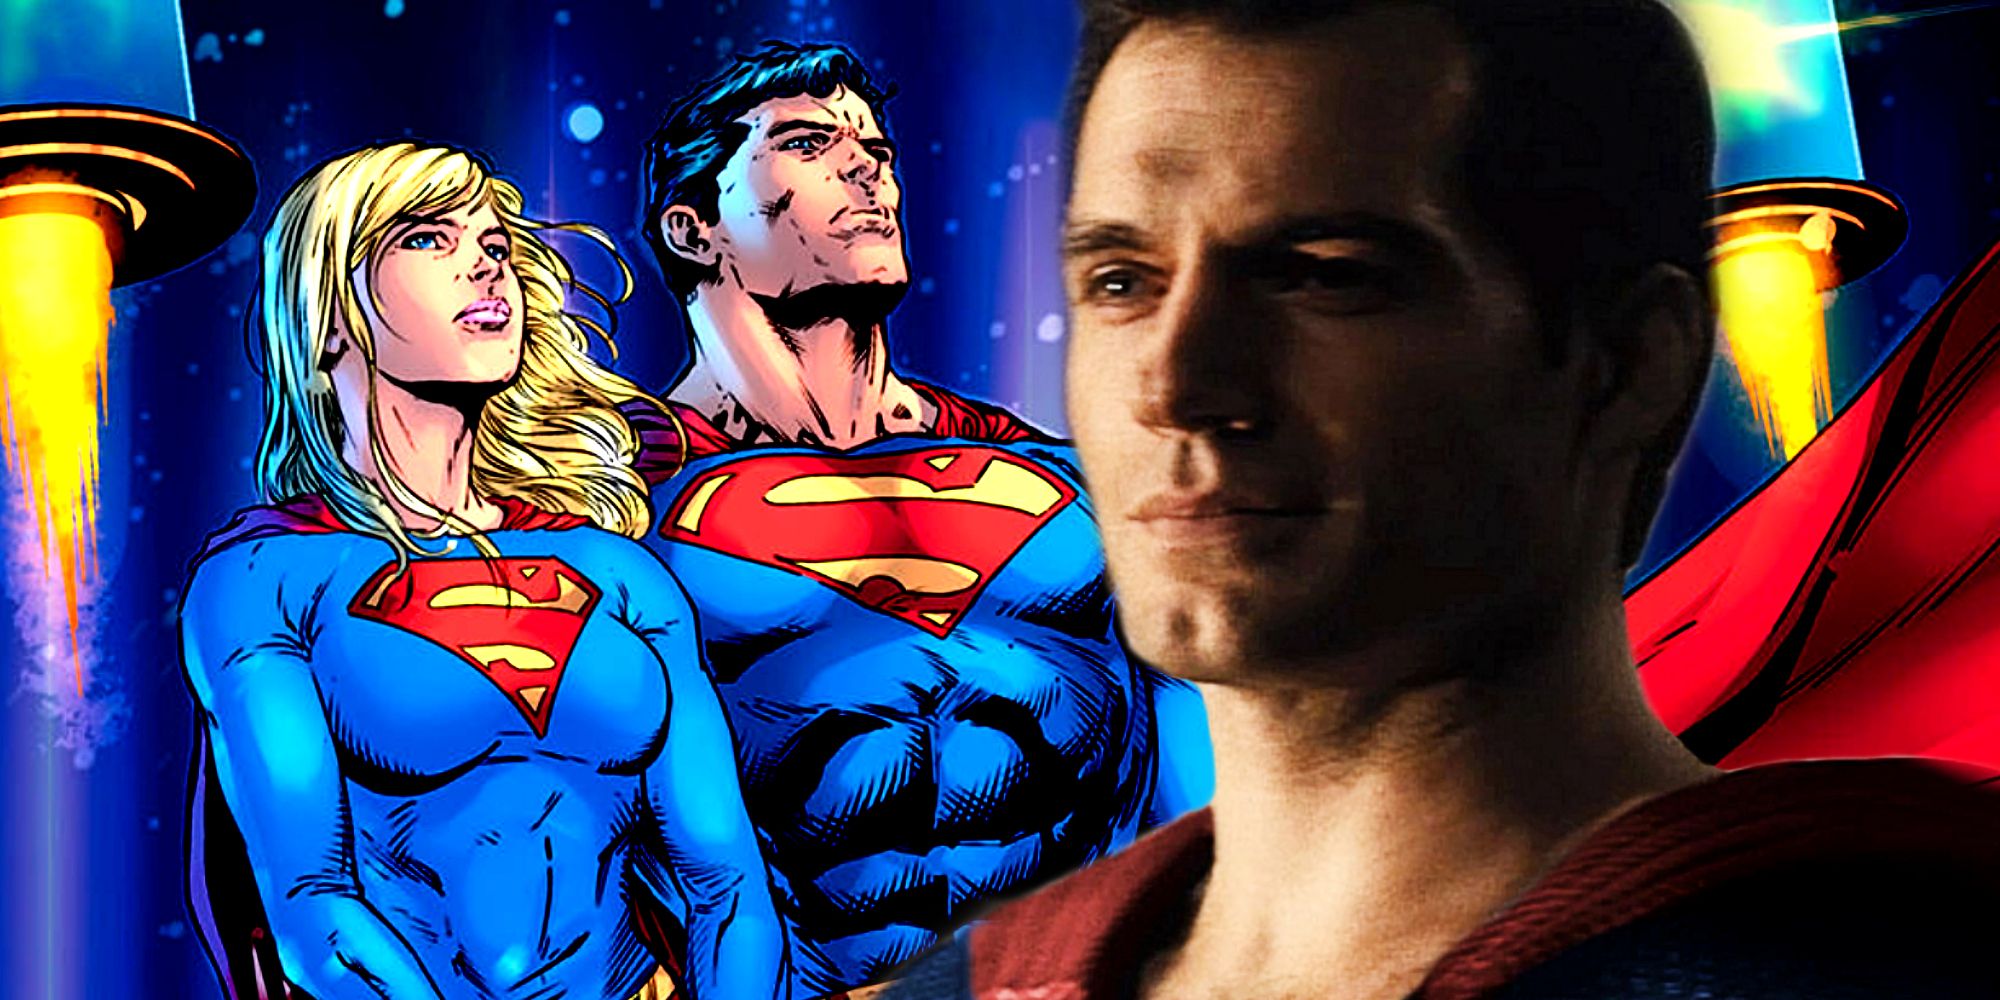 Henry Cavill as Superman and Supergirl in DC Comics